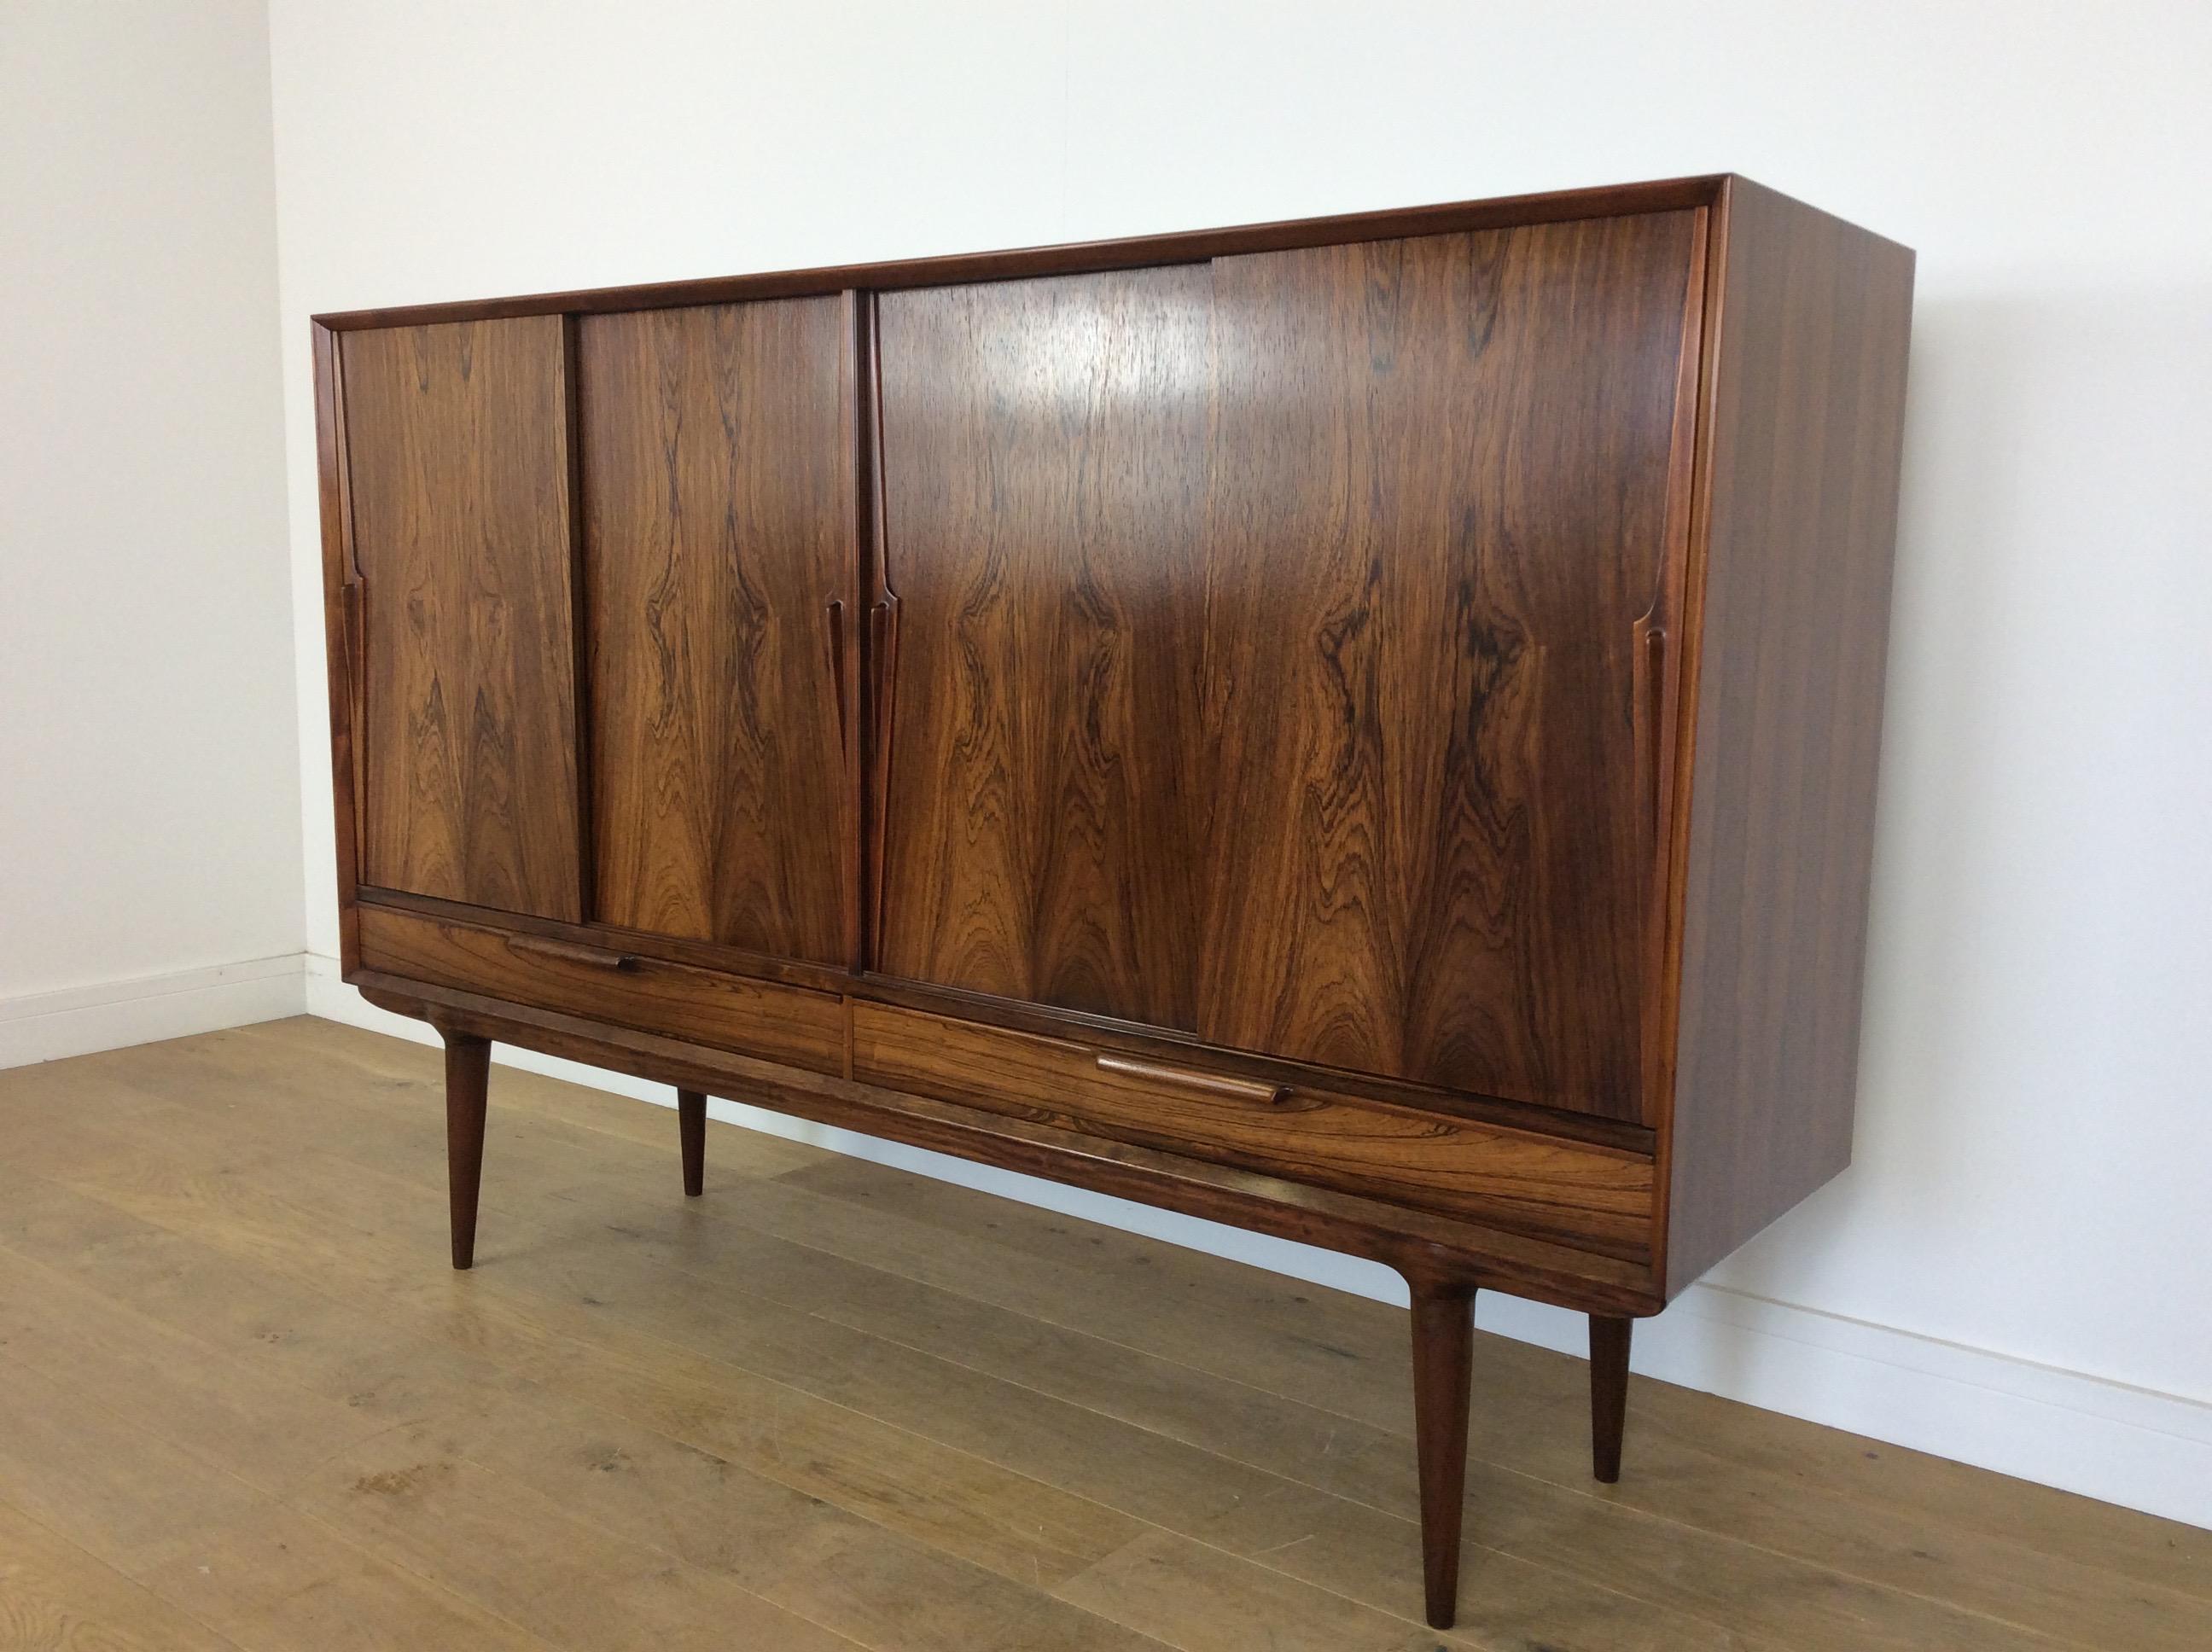 Midcentury rosewood high board cabinet.
Designed in the late 1950s by Arne Vodder and manufactured by Sibast furniture in the 1960s.
Beautiful grain to the rosewood.
Measures: 120.5 cm H, 180 cm W, 46.5 cm D.
Danish, circa 1960.